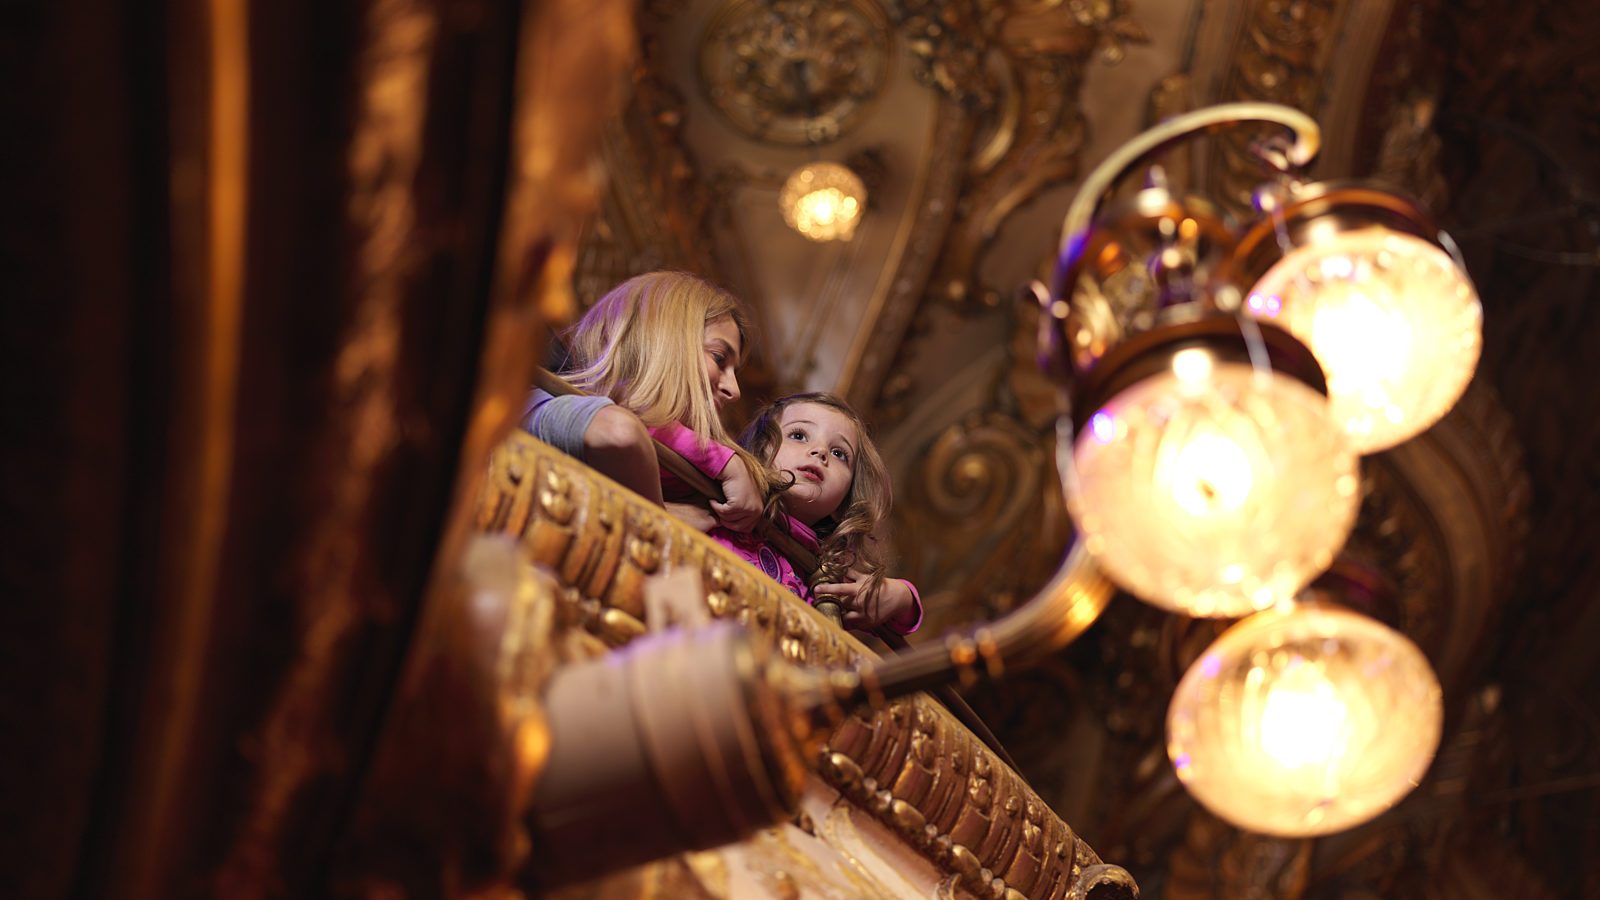 A photograph of a lady and little girl sat in the circle of the theatre.